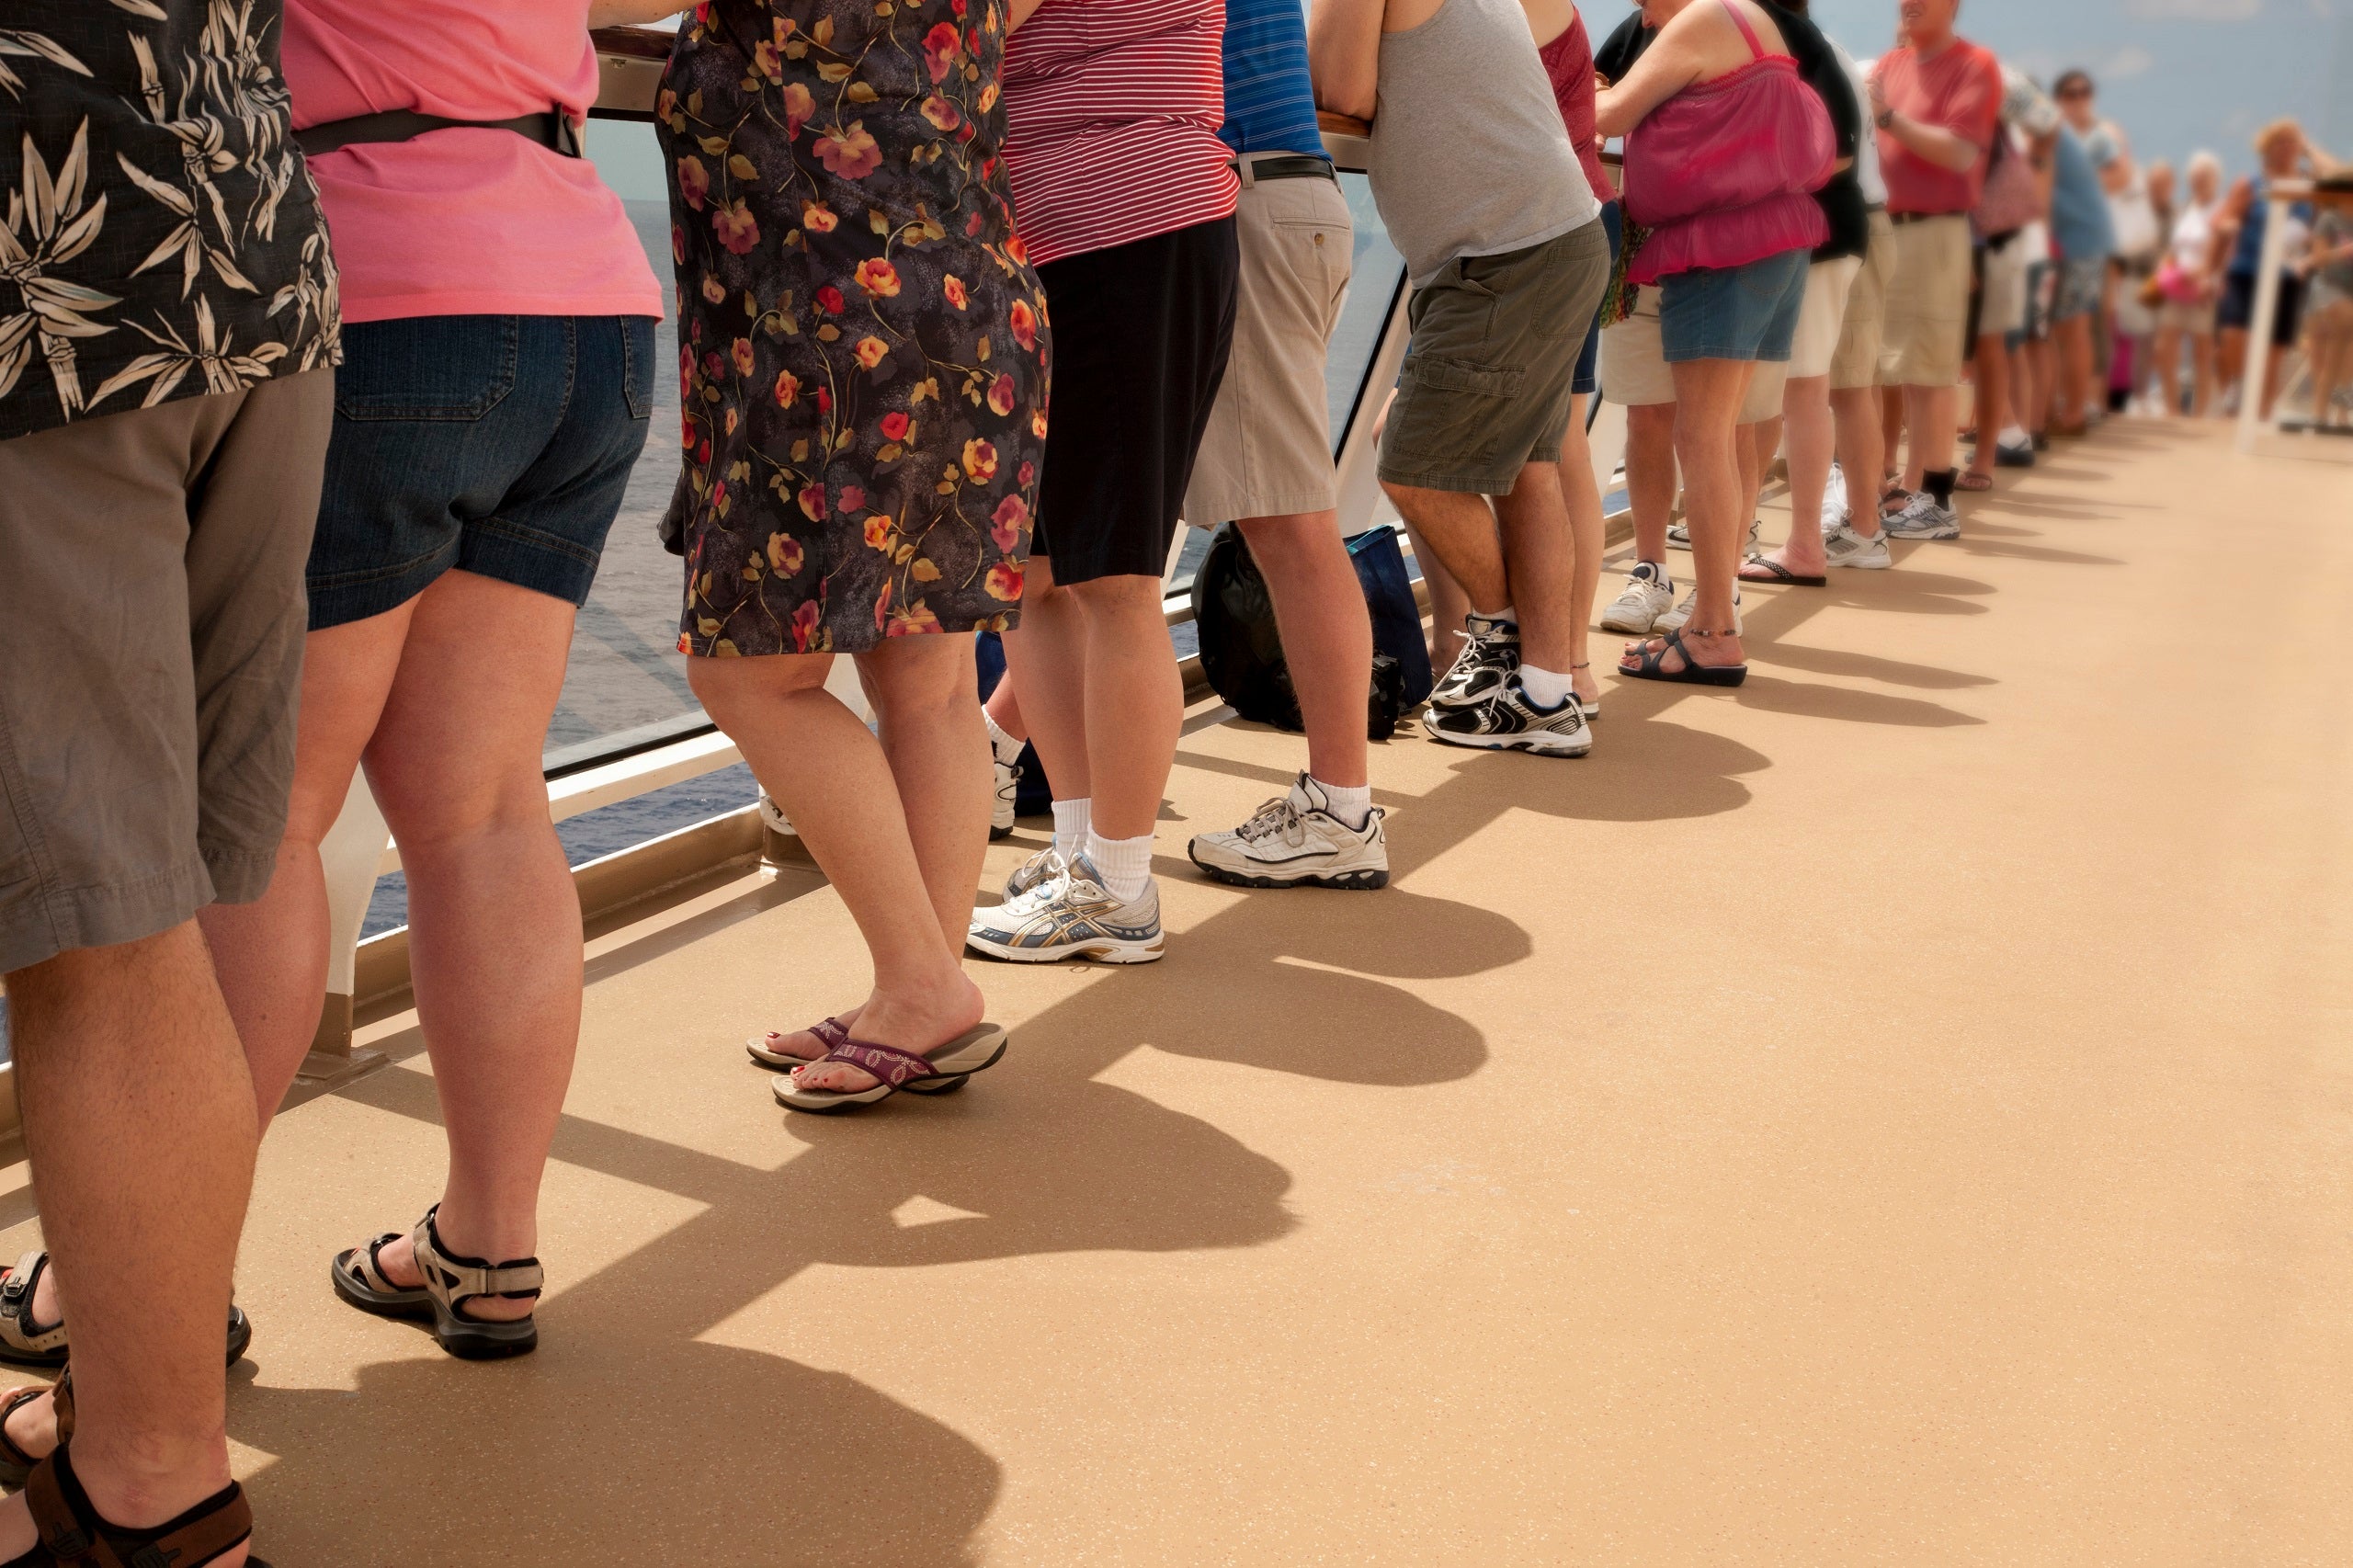 Cruise ship passengers standing along a deck railing wearing casual clothing